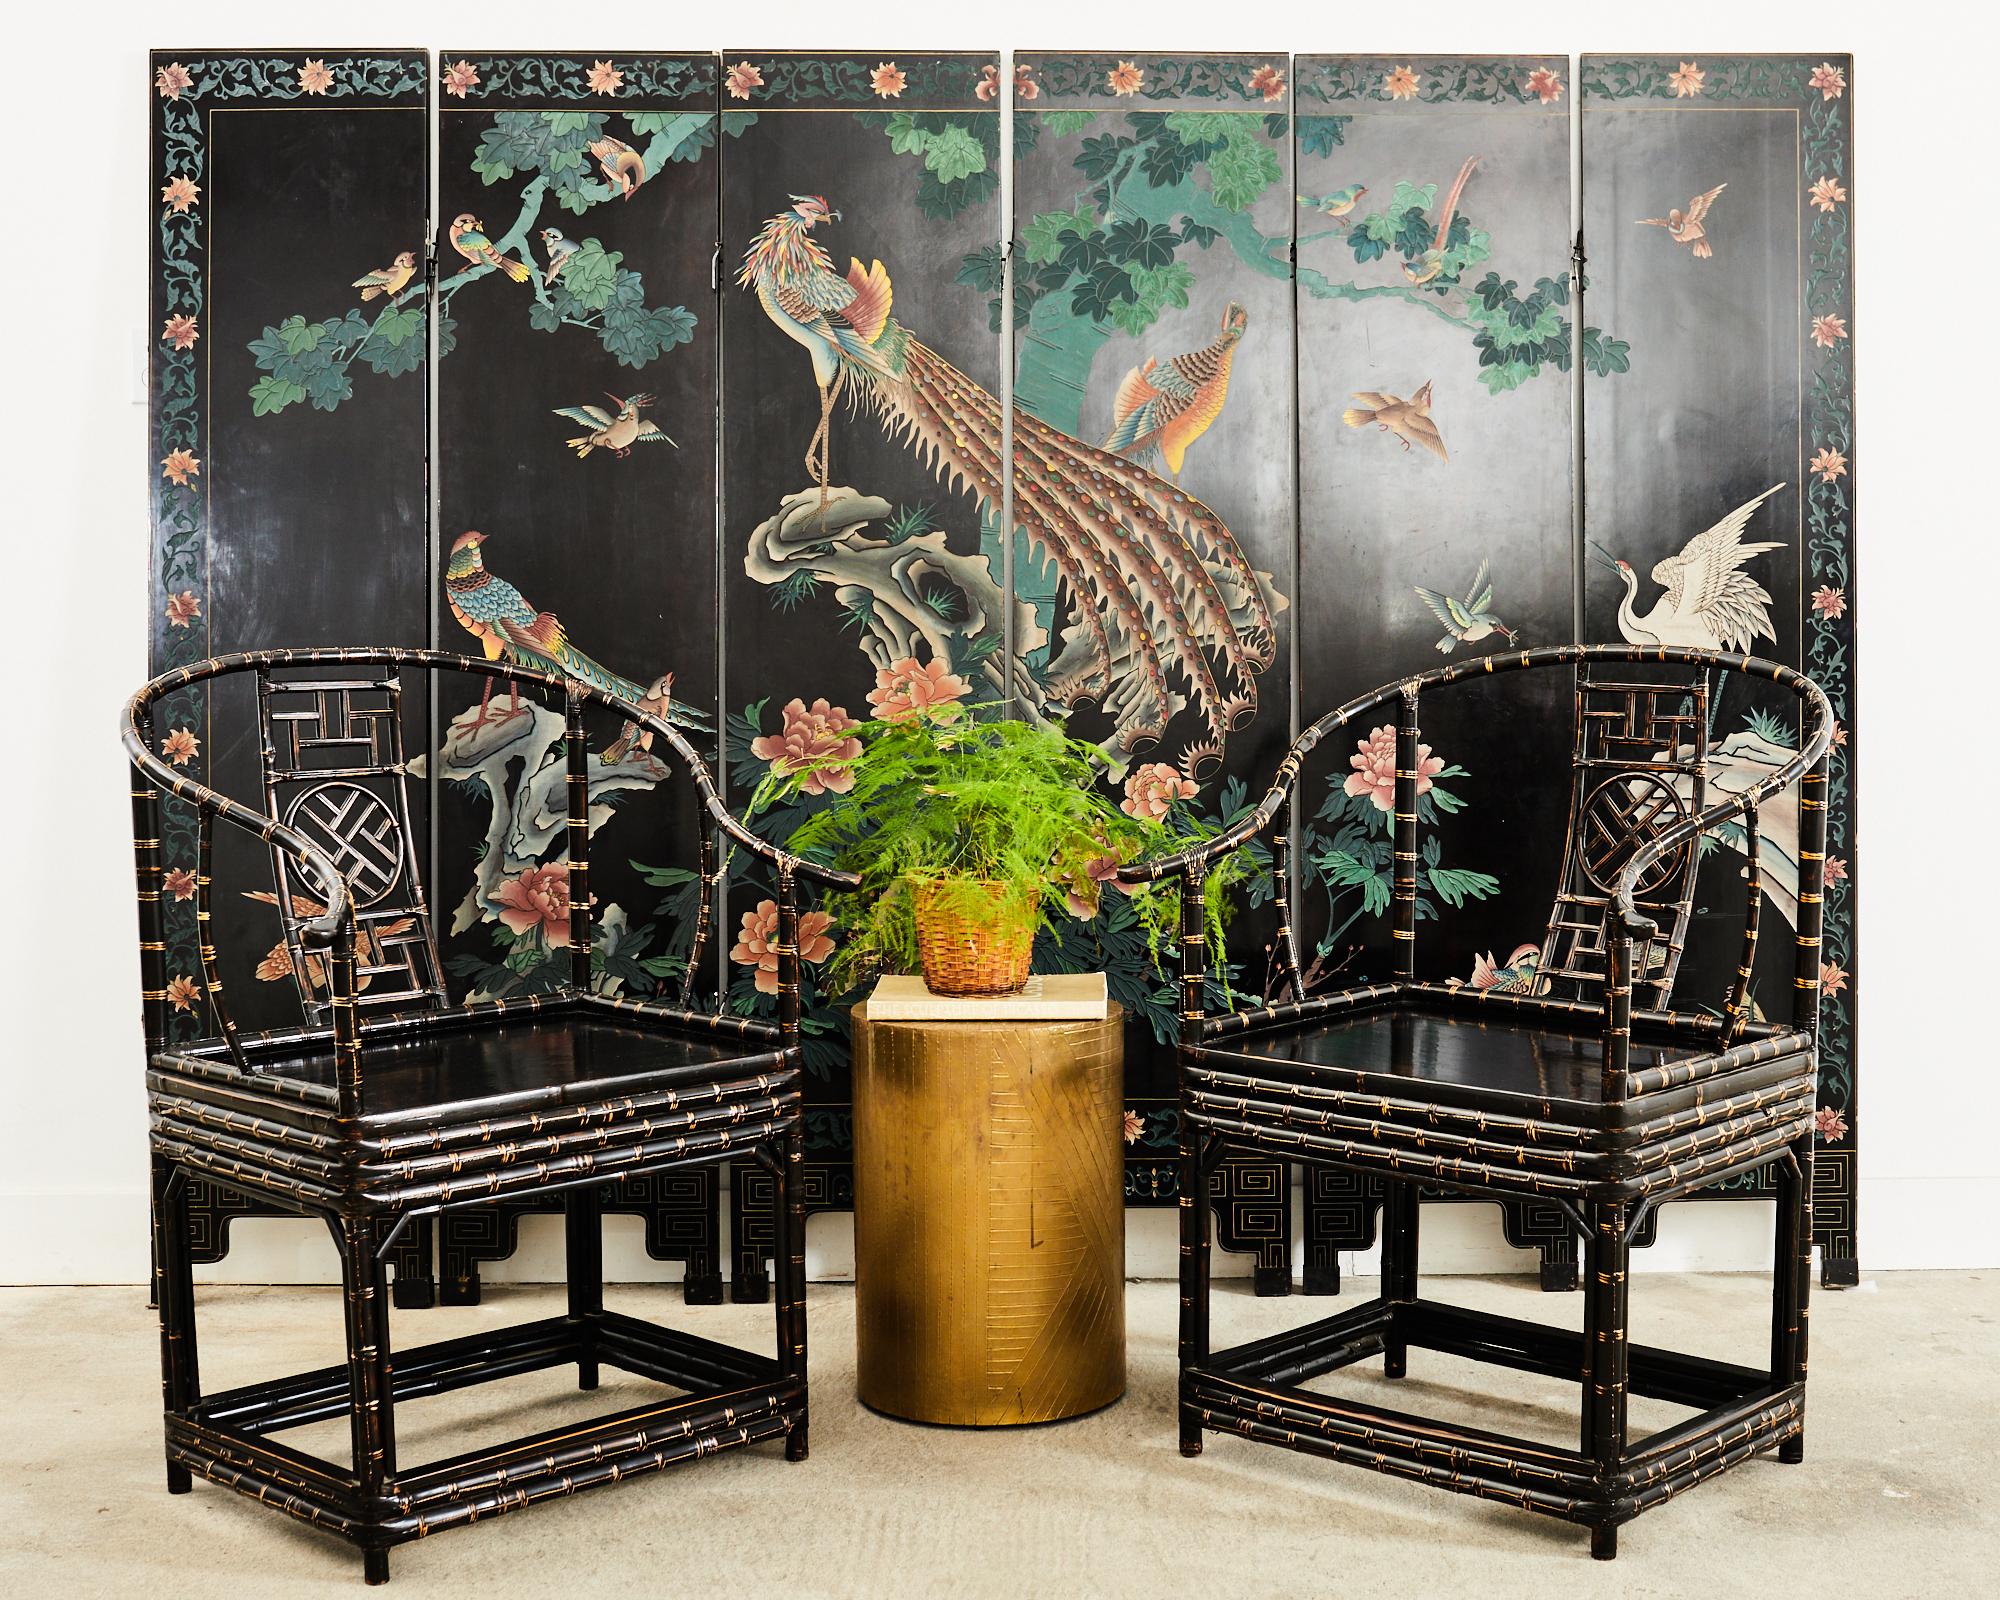 Dramatic pair of 20th century Chinese export bamboo chairs featuring a gracefully curved horseshoe back ending with out swept hooks. Constructed in the Ming dynasty style with a decorative geometric open fretwork design splat. The generous square